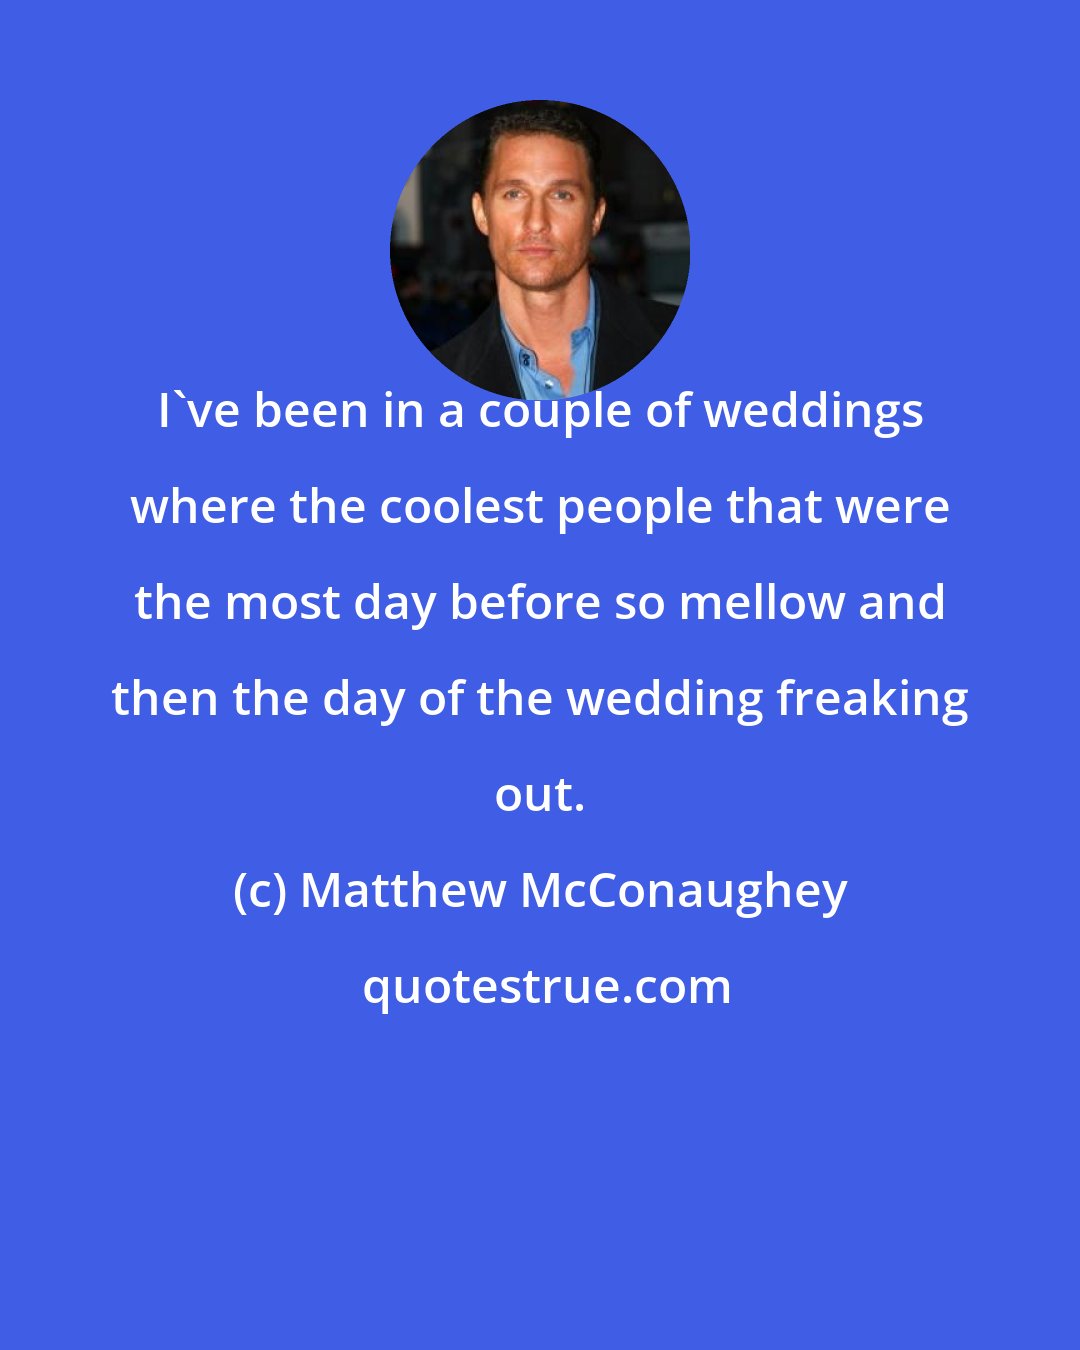 Matthew McConaughey: I've been in a couple of weddings where the coolest people that were the most day before so mellow and then the day of the wedding freaking out.